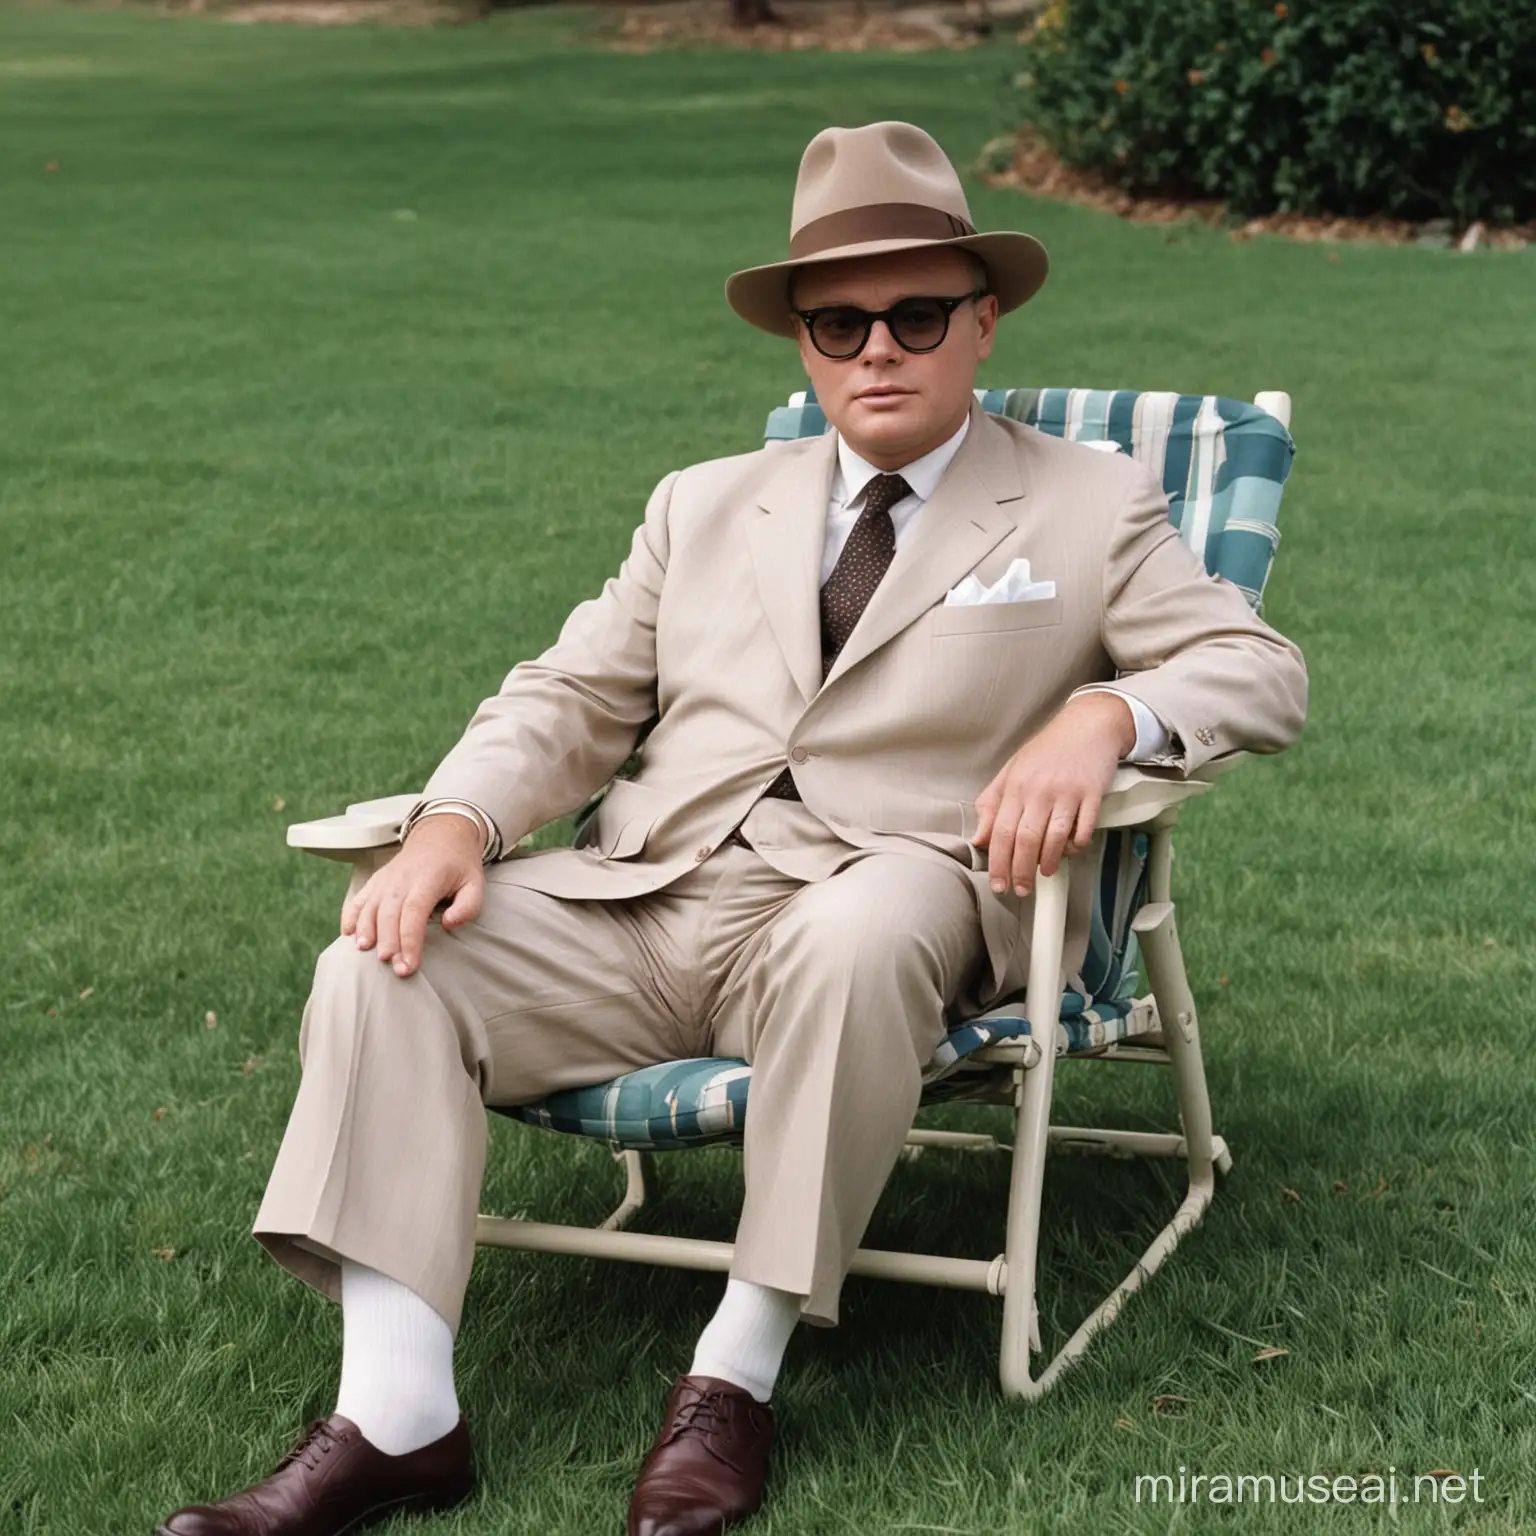 Truman capote sitting in a lawn chair wearing a suit and hat full body view and in color